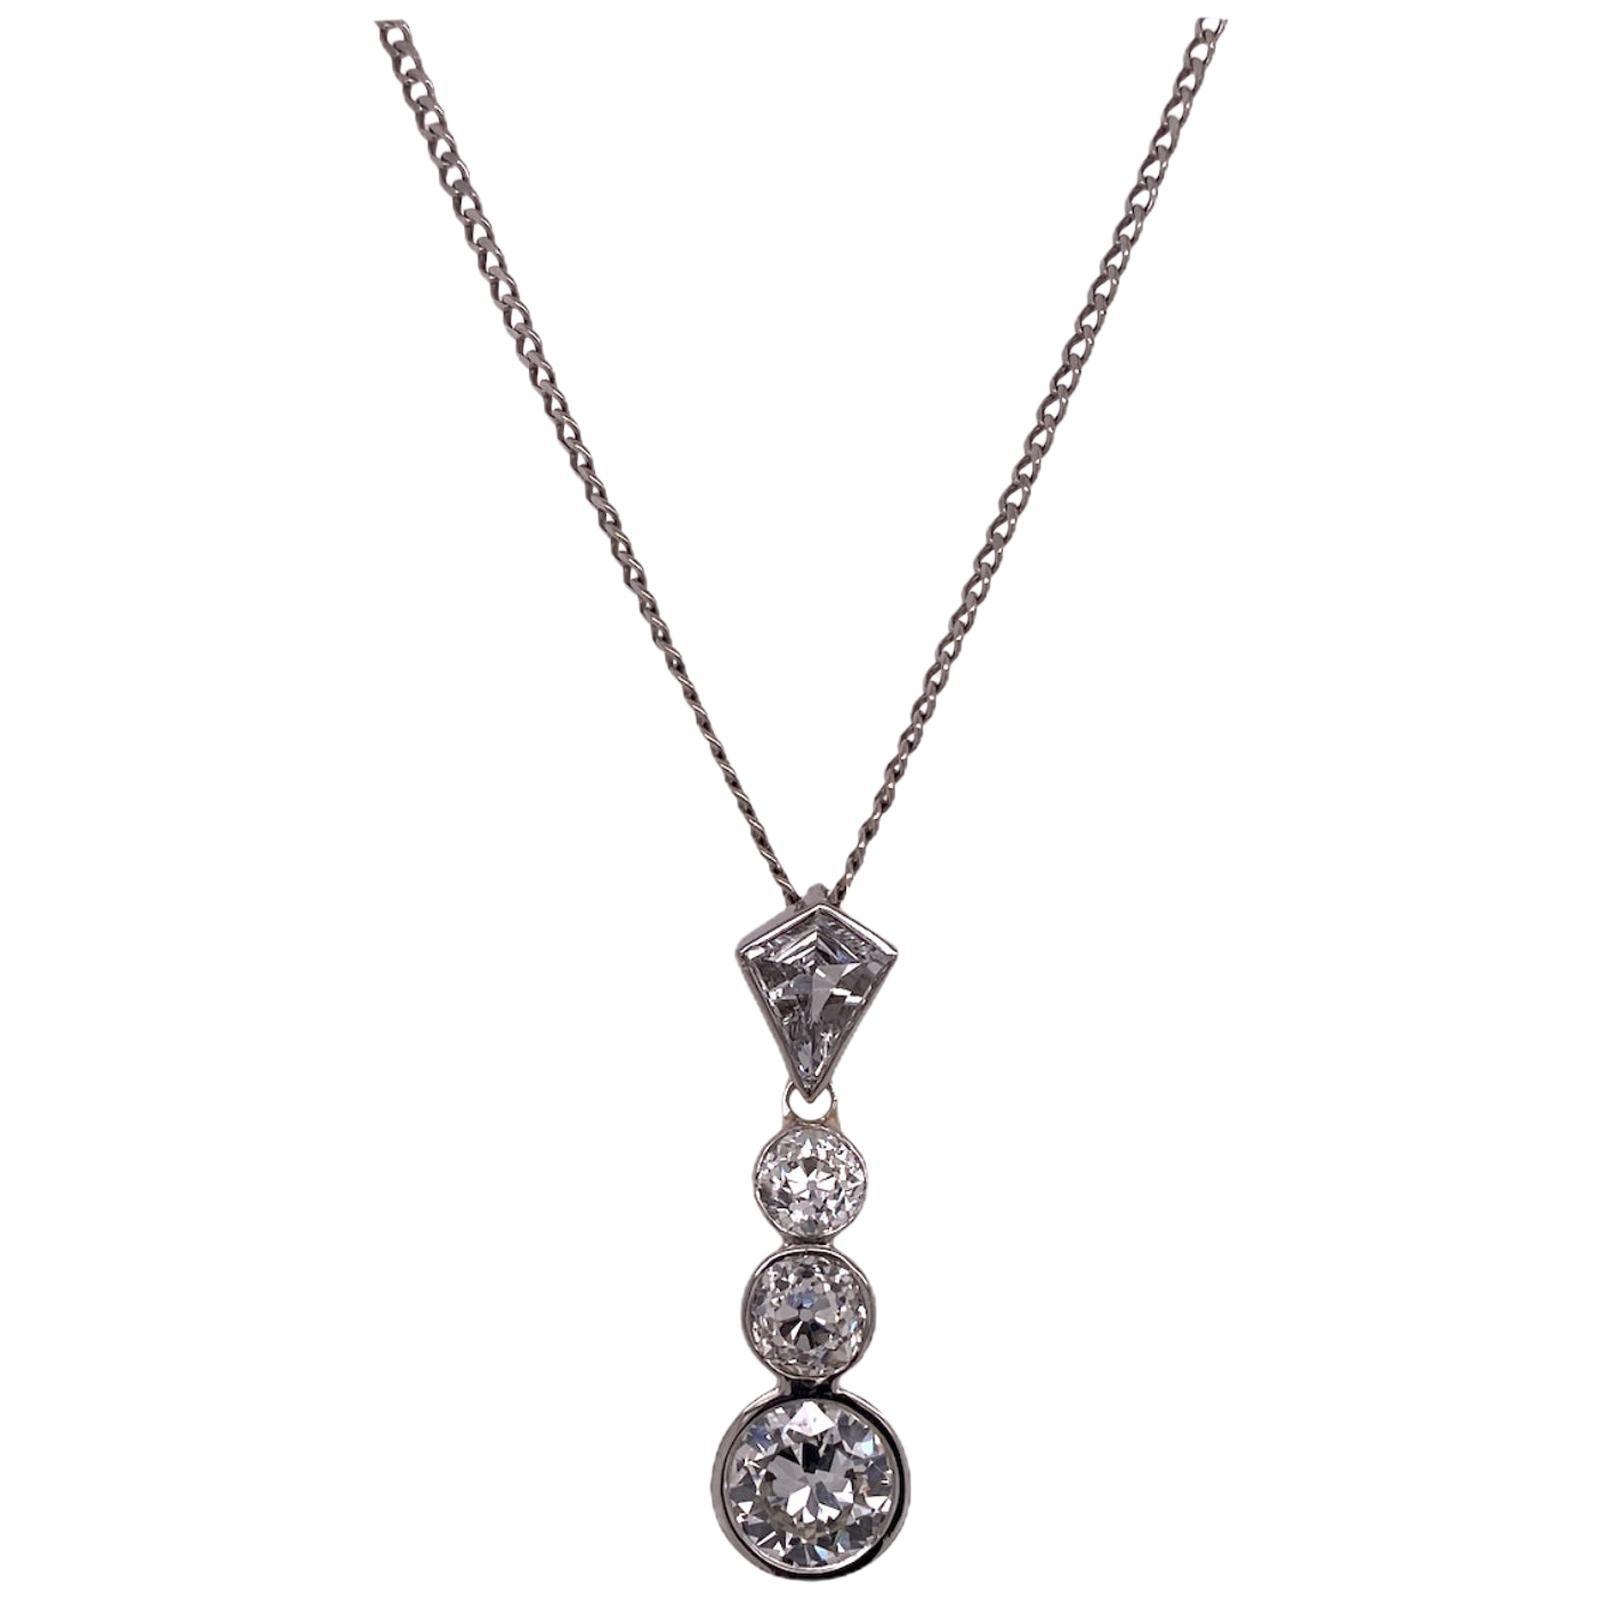 Diamond drop estate necklace fashioned in platinum. The necklace features an Old European cut diamond weighing 1.00 carat,  two additional Old Europeans weighing .62 carat total weight, and a single kite shape diamond weighing .43 carats. The